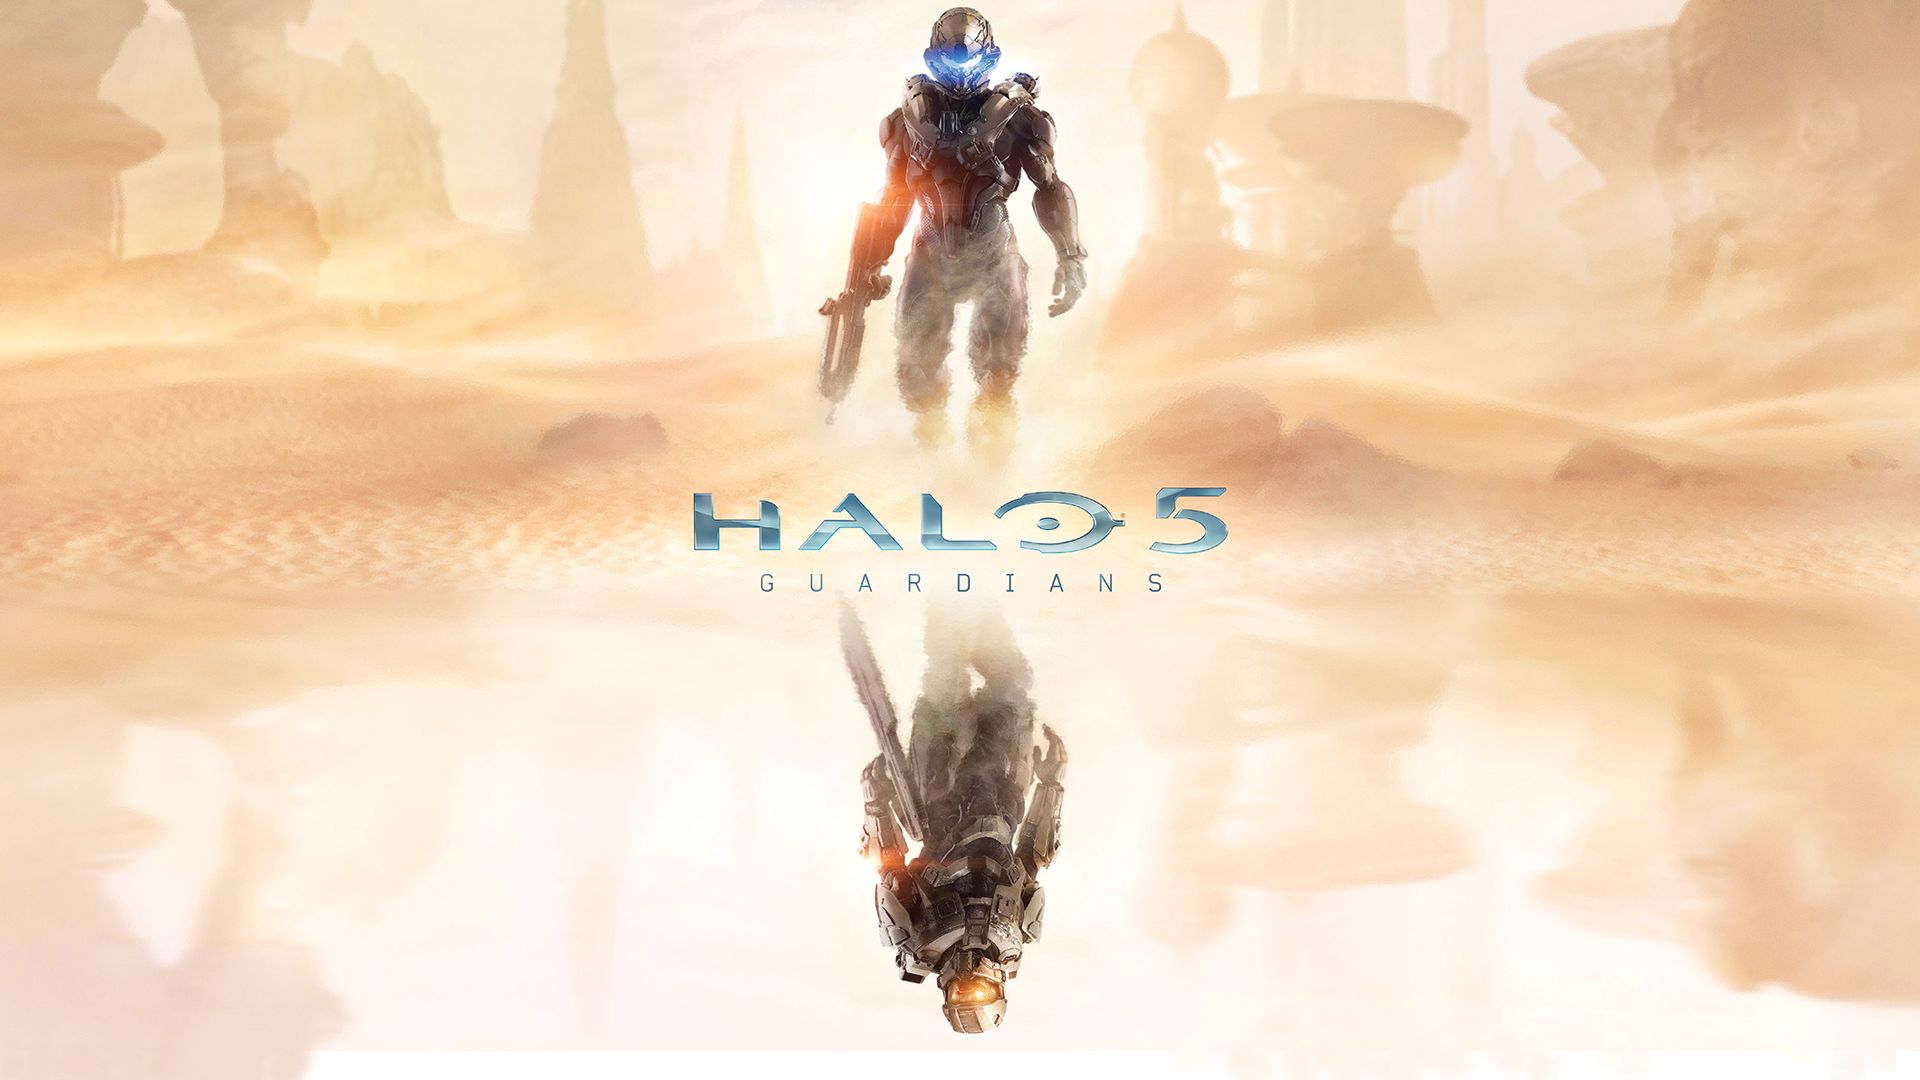 android video game, halo 5: guardians, definiton, halo, xbox